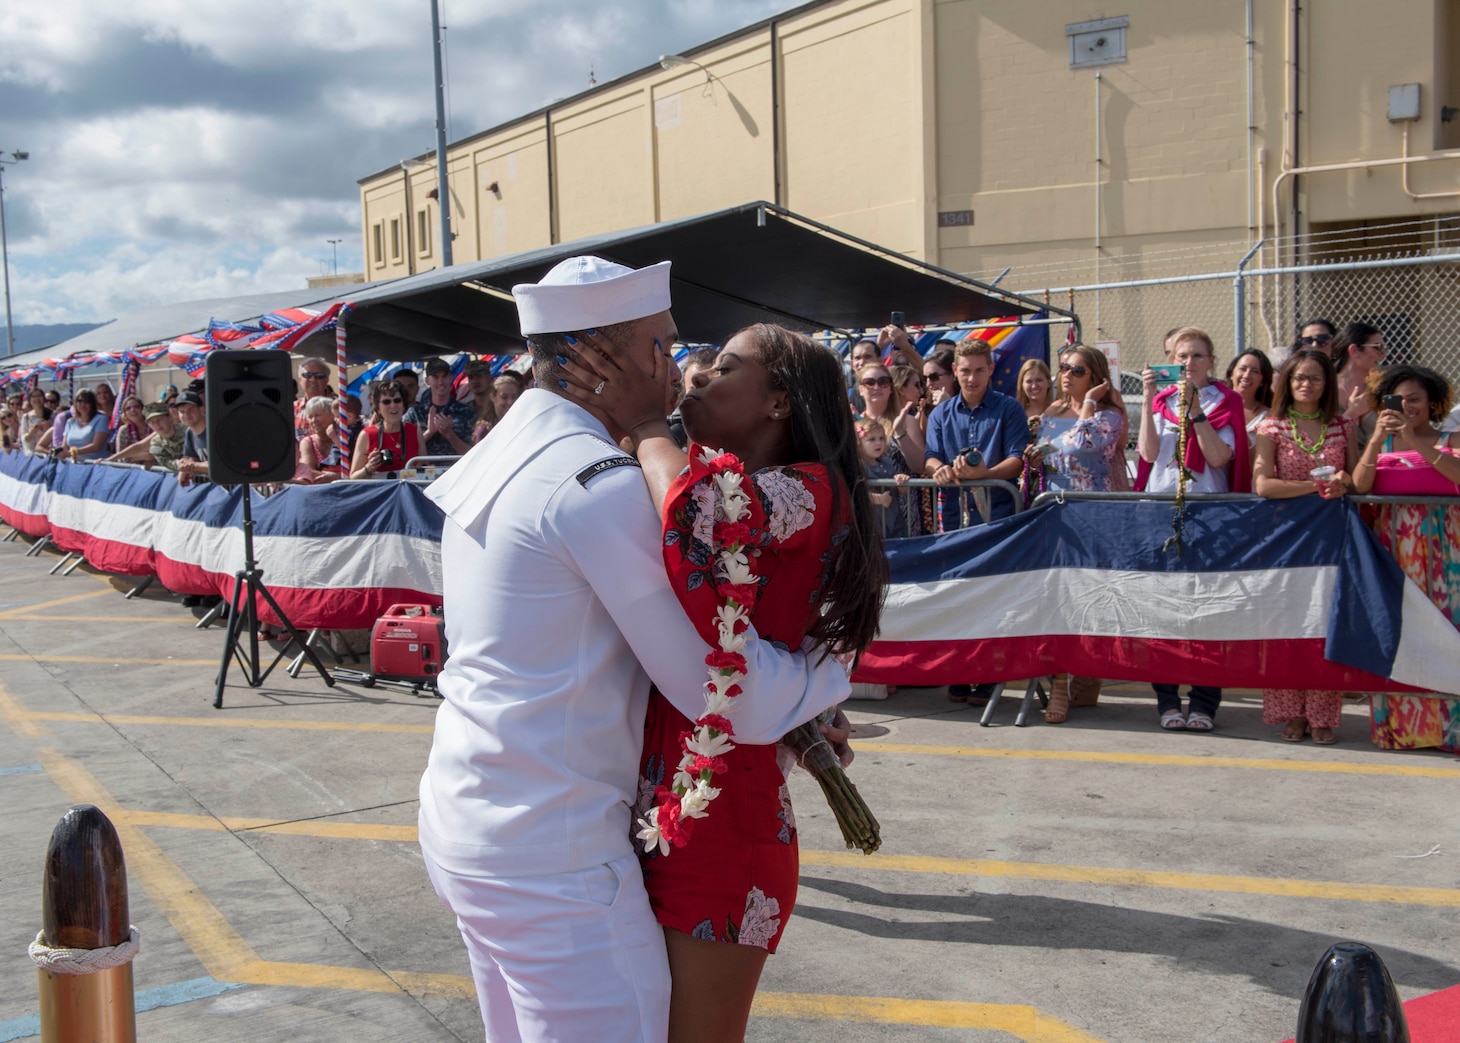 PEARL HARBOR (Mar. 7, 2018) A Sailor stationed aboard the Los Angeles-class fast attack submarine USS Tucson(SSN 770), is greeted by his loved one on the pier at Joint Base Pearl Harbor-Hickam after returning from a six-month Western Pacific deployment, Mar. 7. (U.S. Navy Photo by Mass Communication Specialist 2nd Class Shaun Griffin/Released)